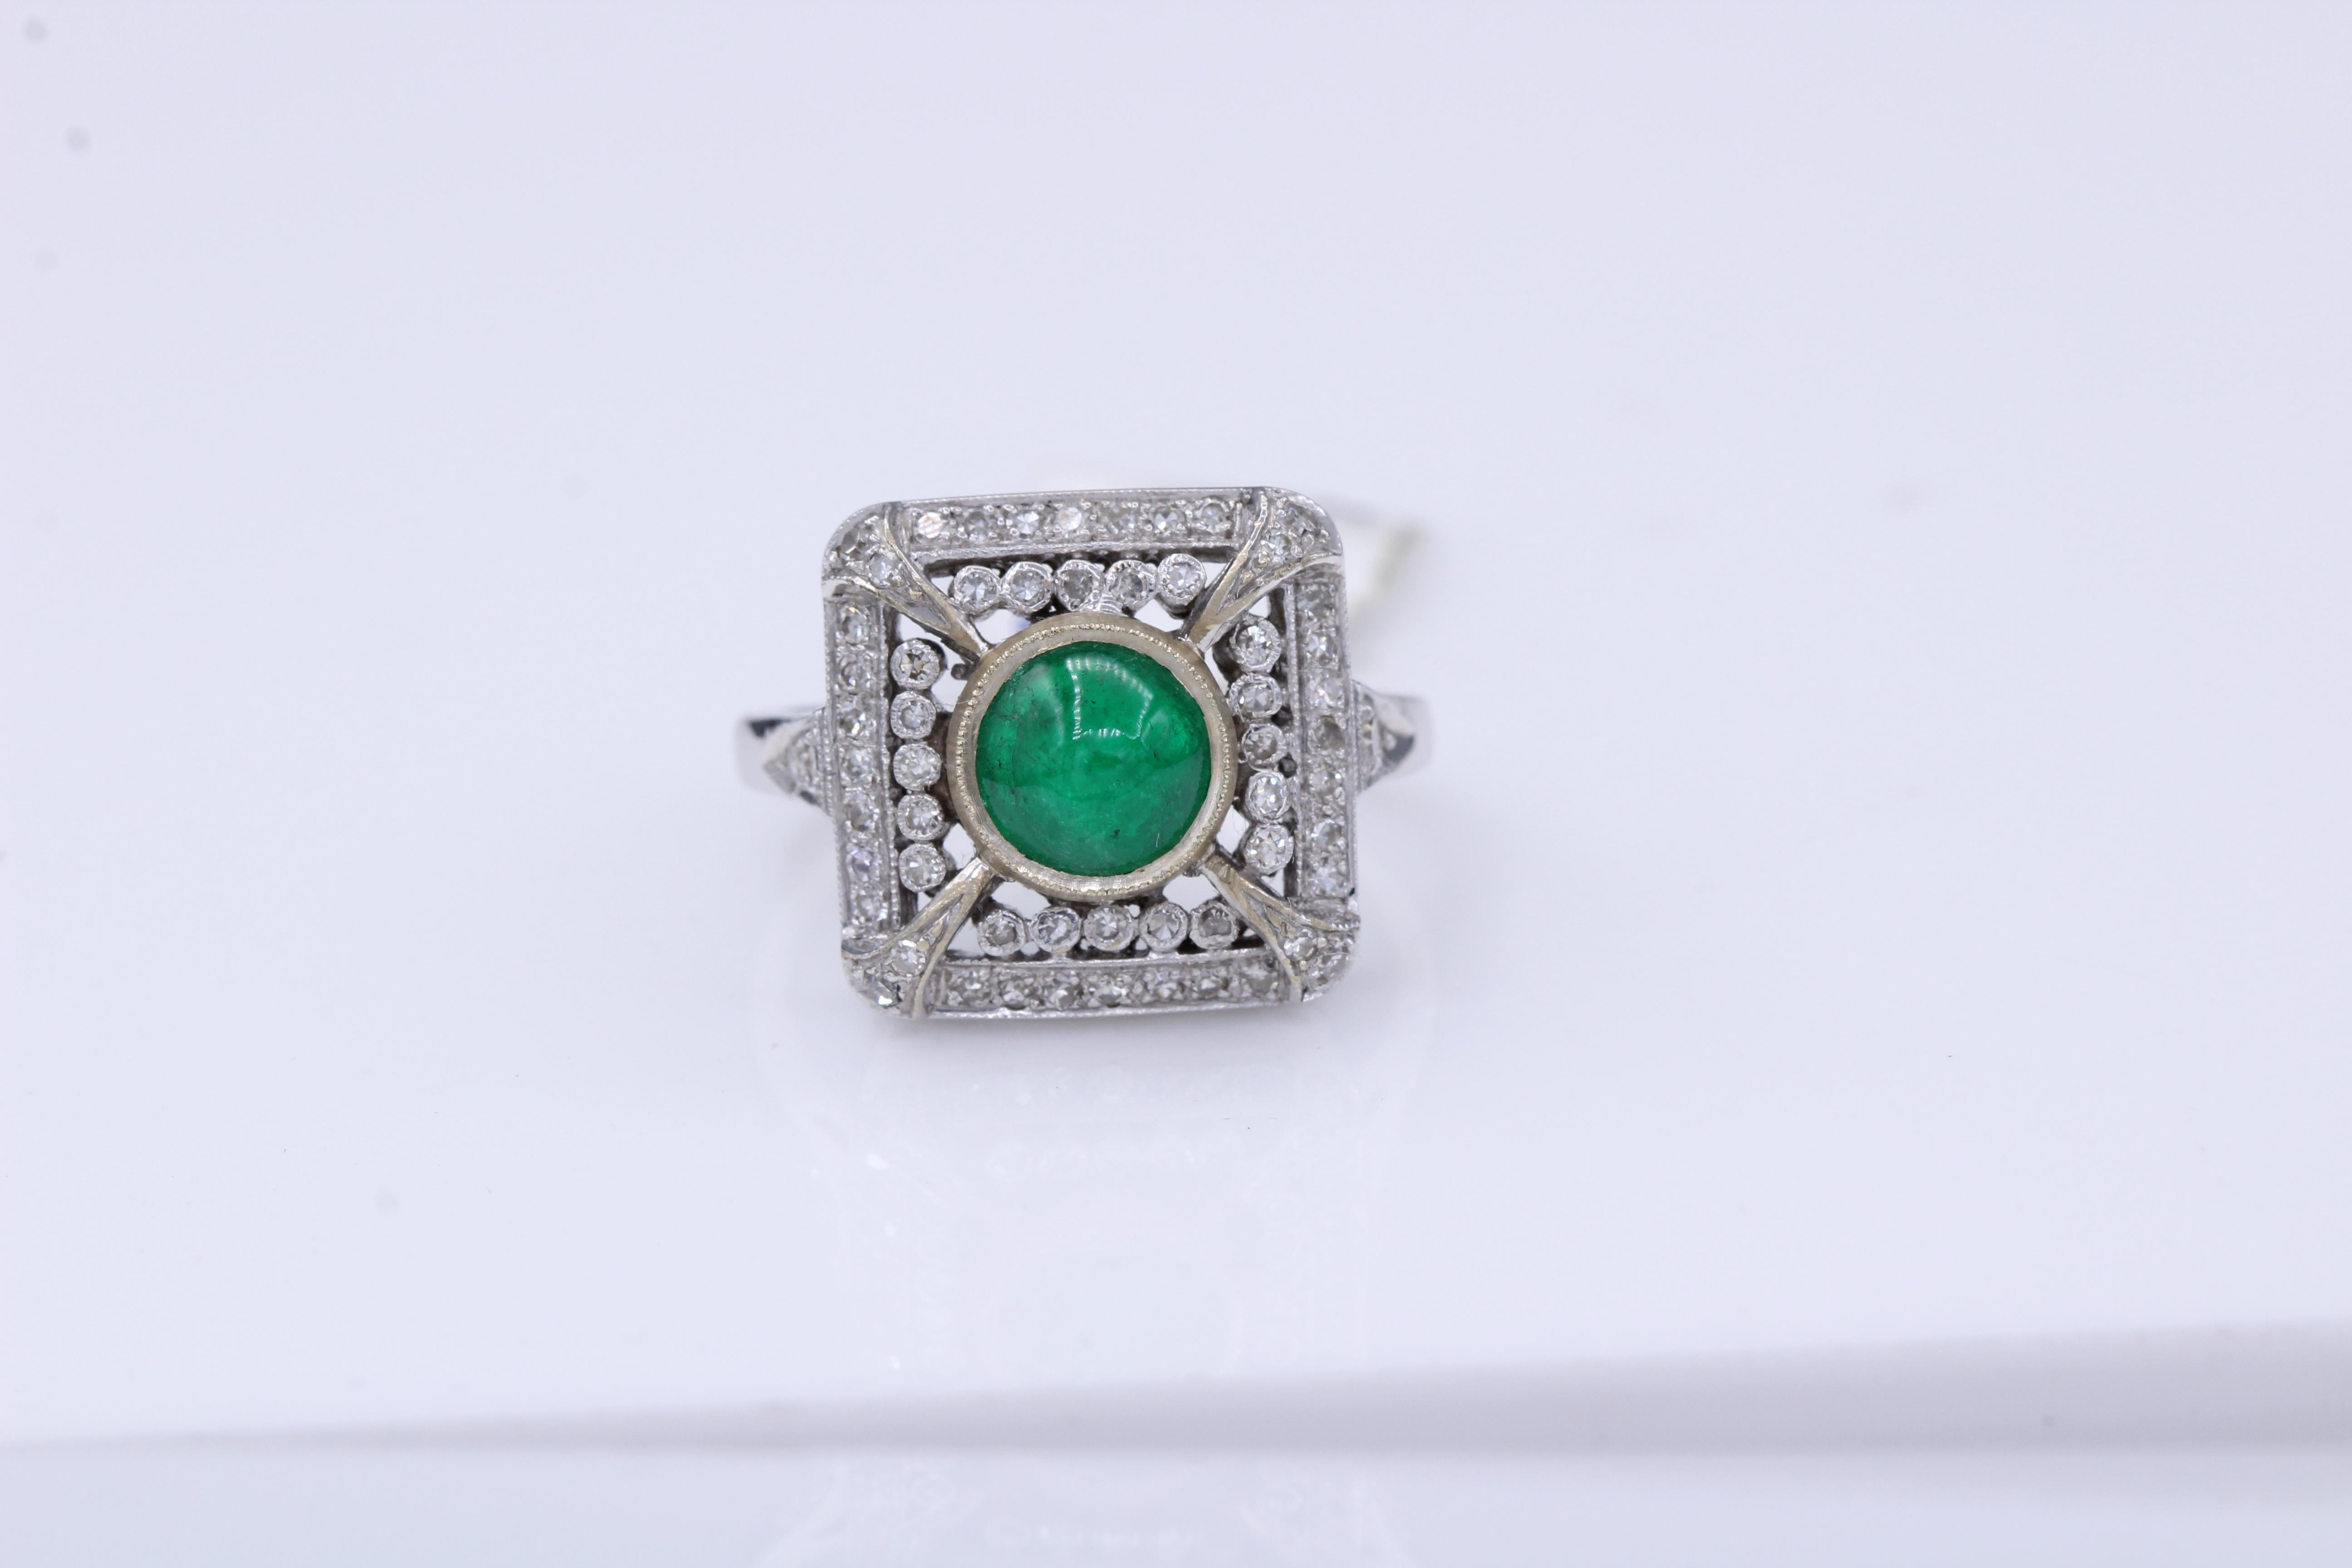 Victorian Vintage Emerald 18 Karat White Gold Ring with Diamonds Cabochon Emerald Ring